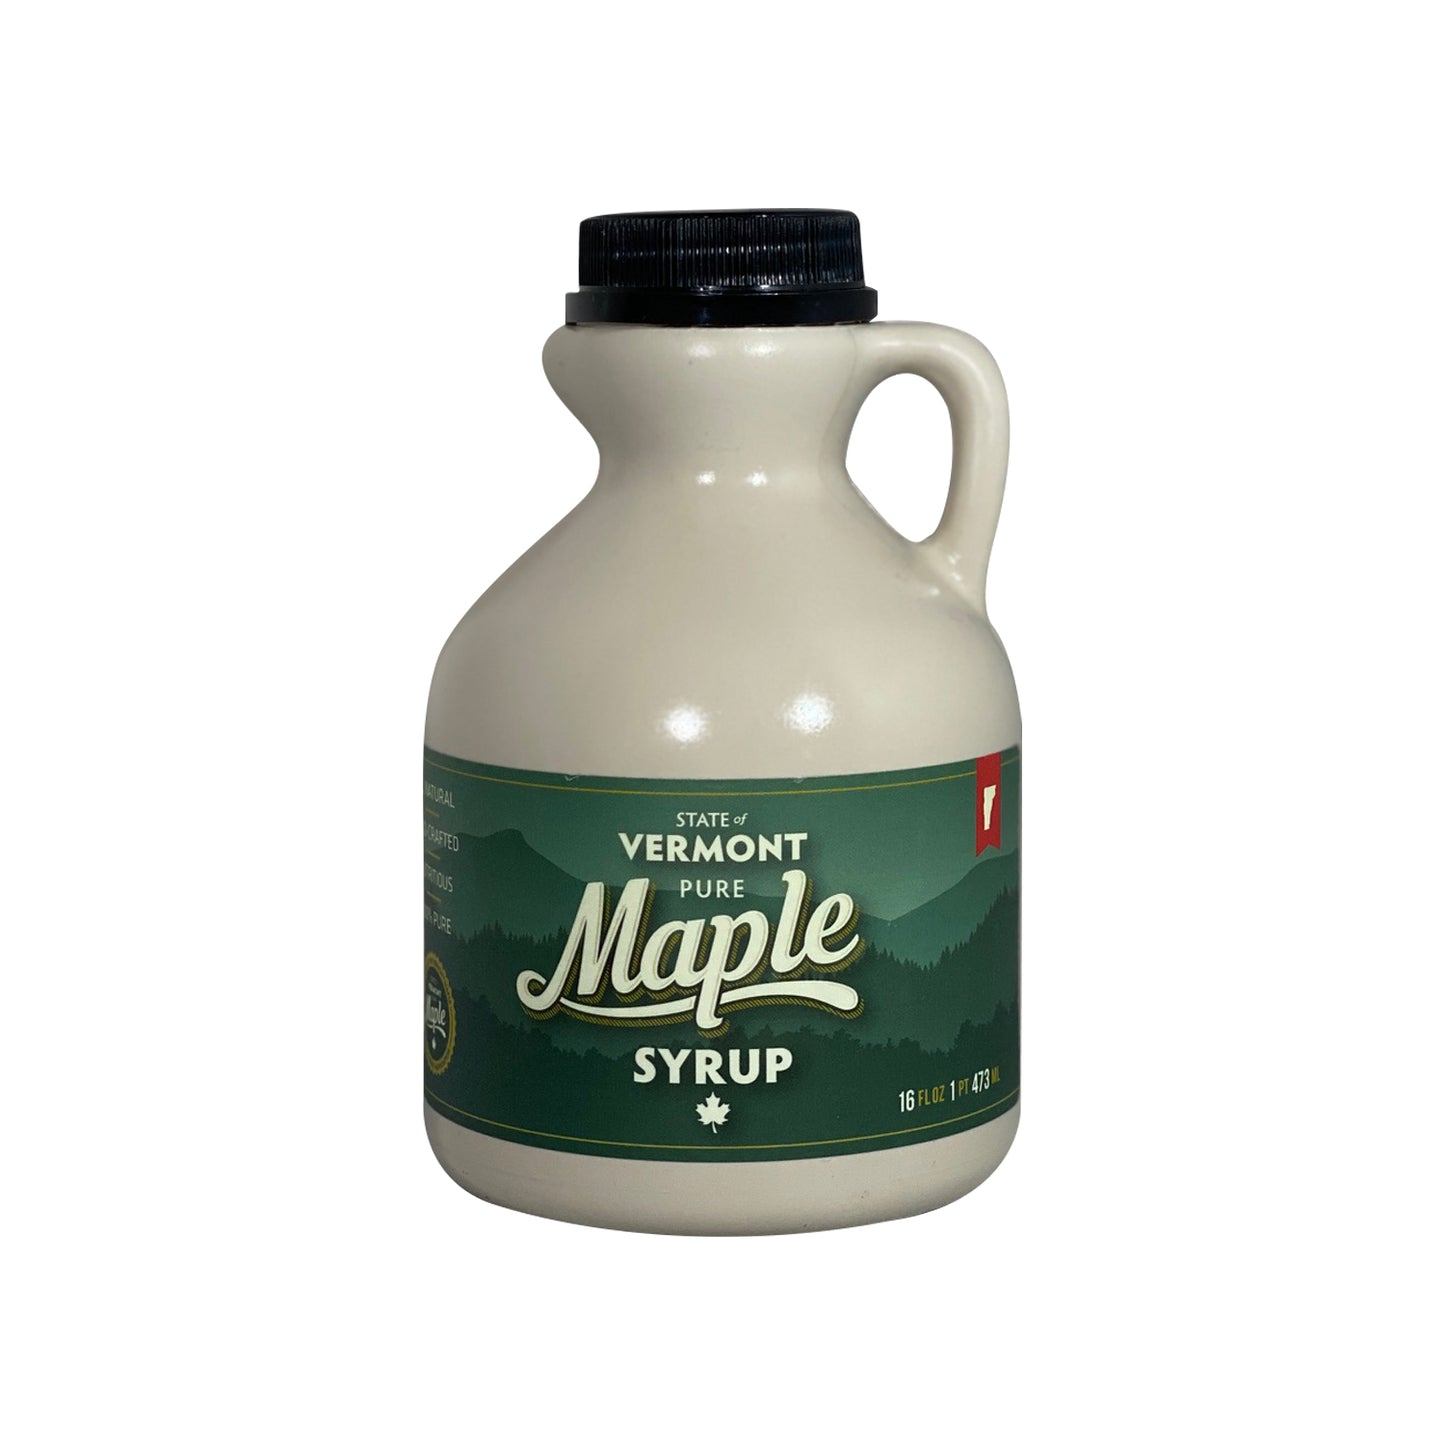 Traditional Maple Syrup - Amber Rich And Dark Robust